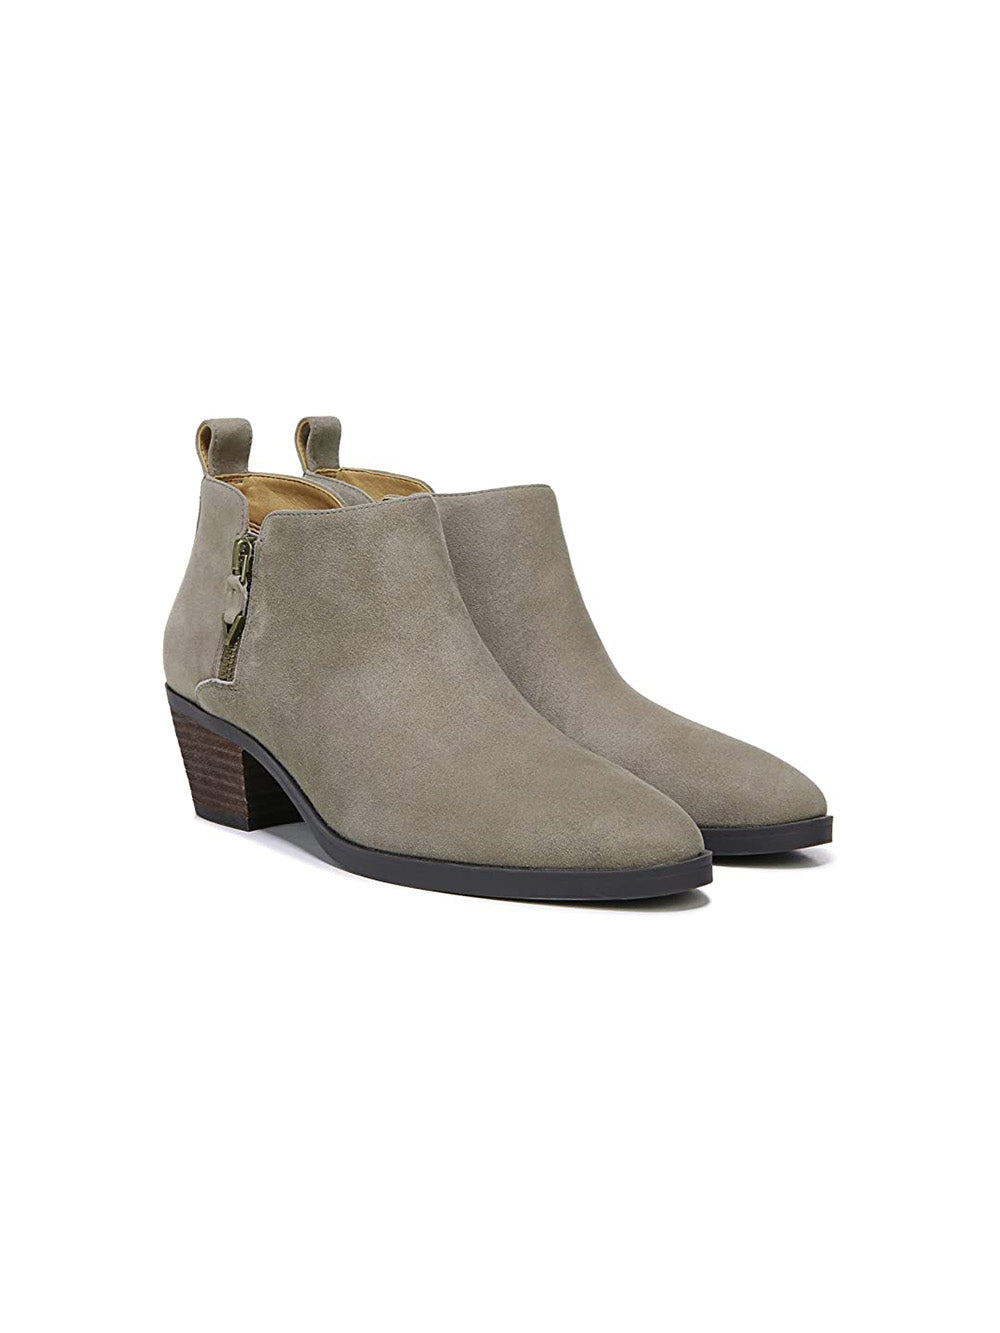 vionic cecily suede ankle boots in stone